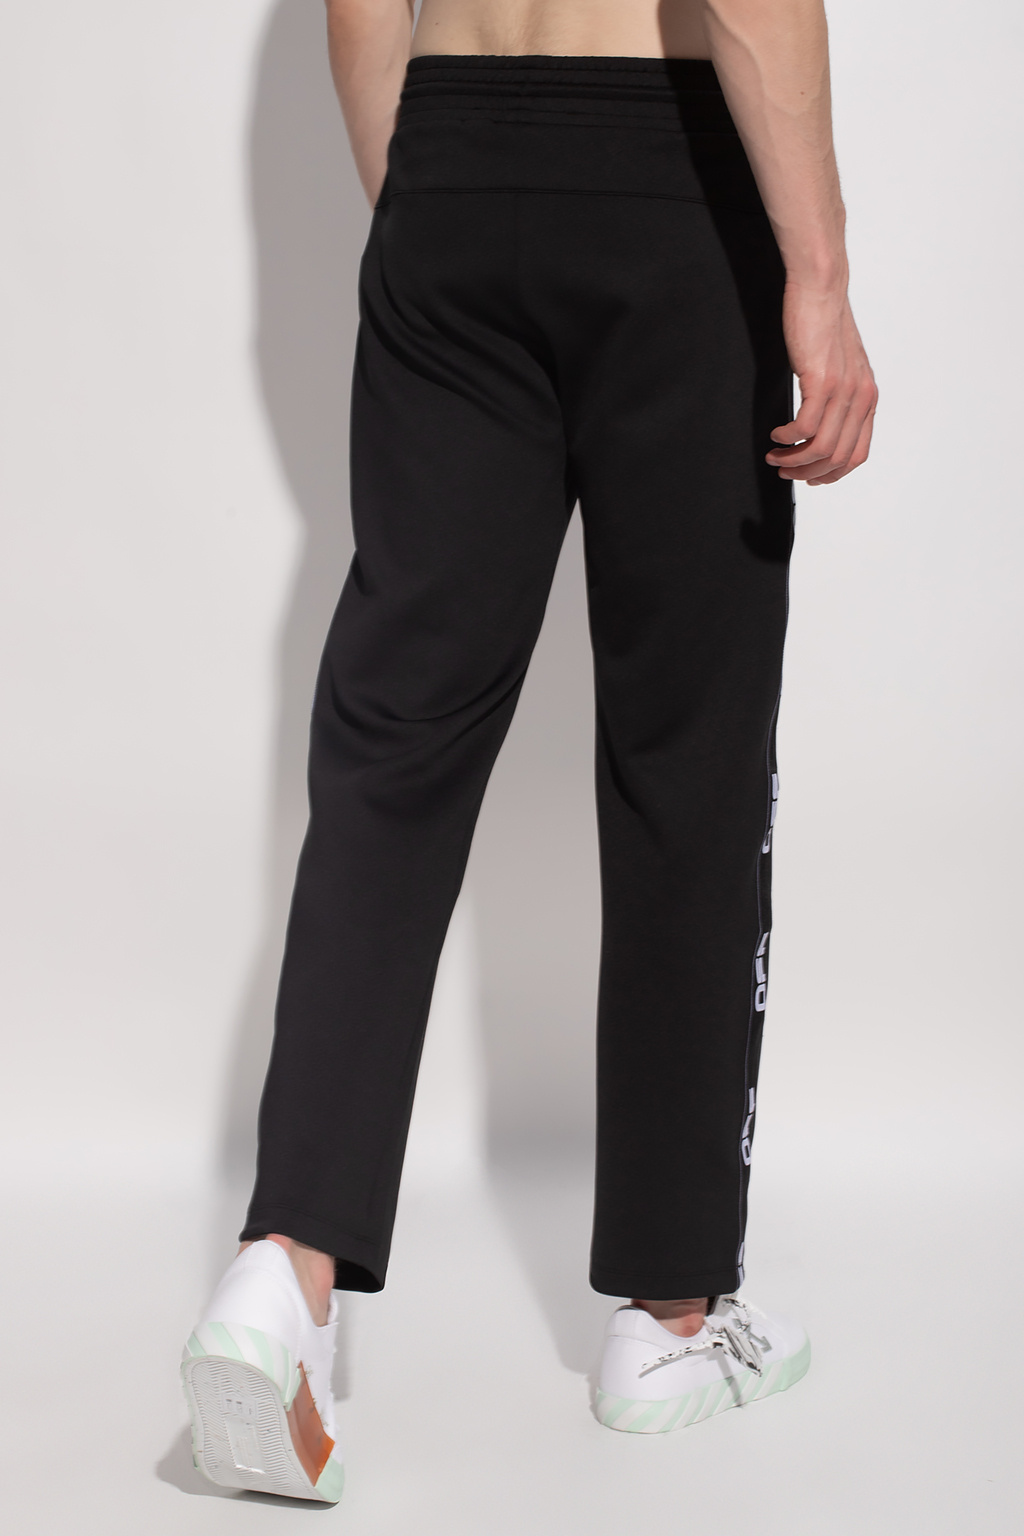 Off-White Sweatpants with logo